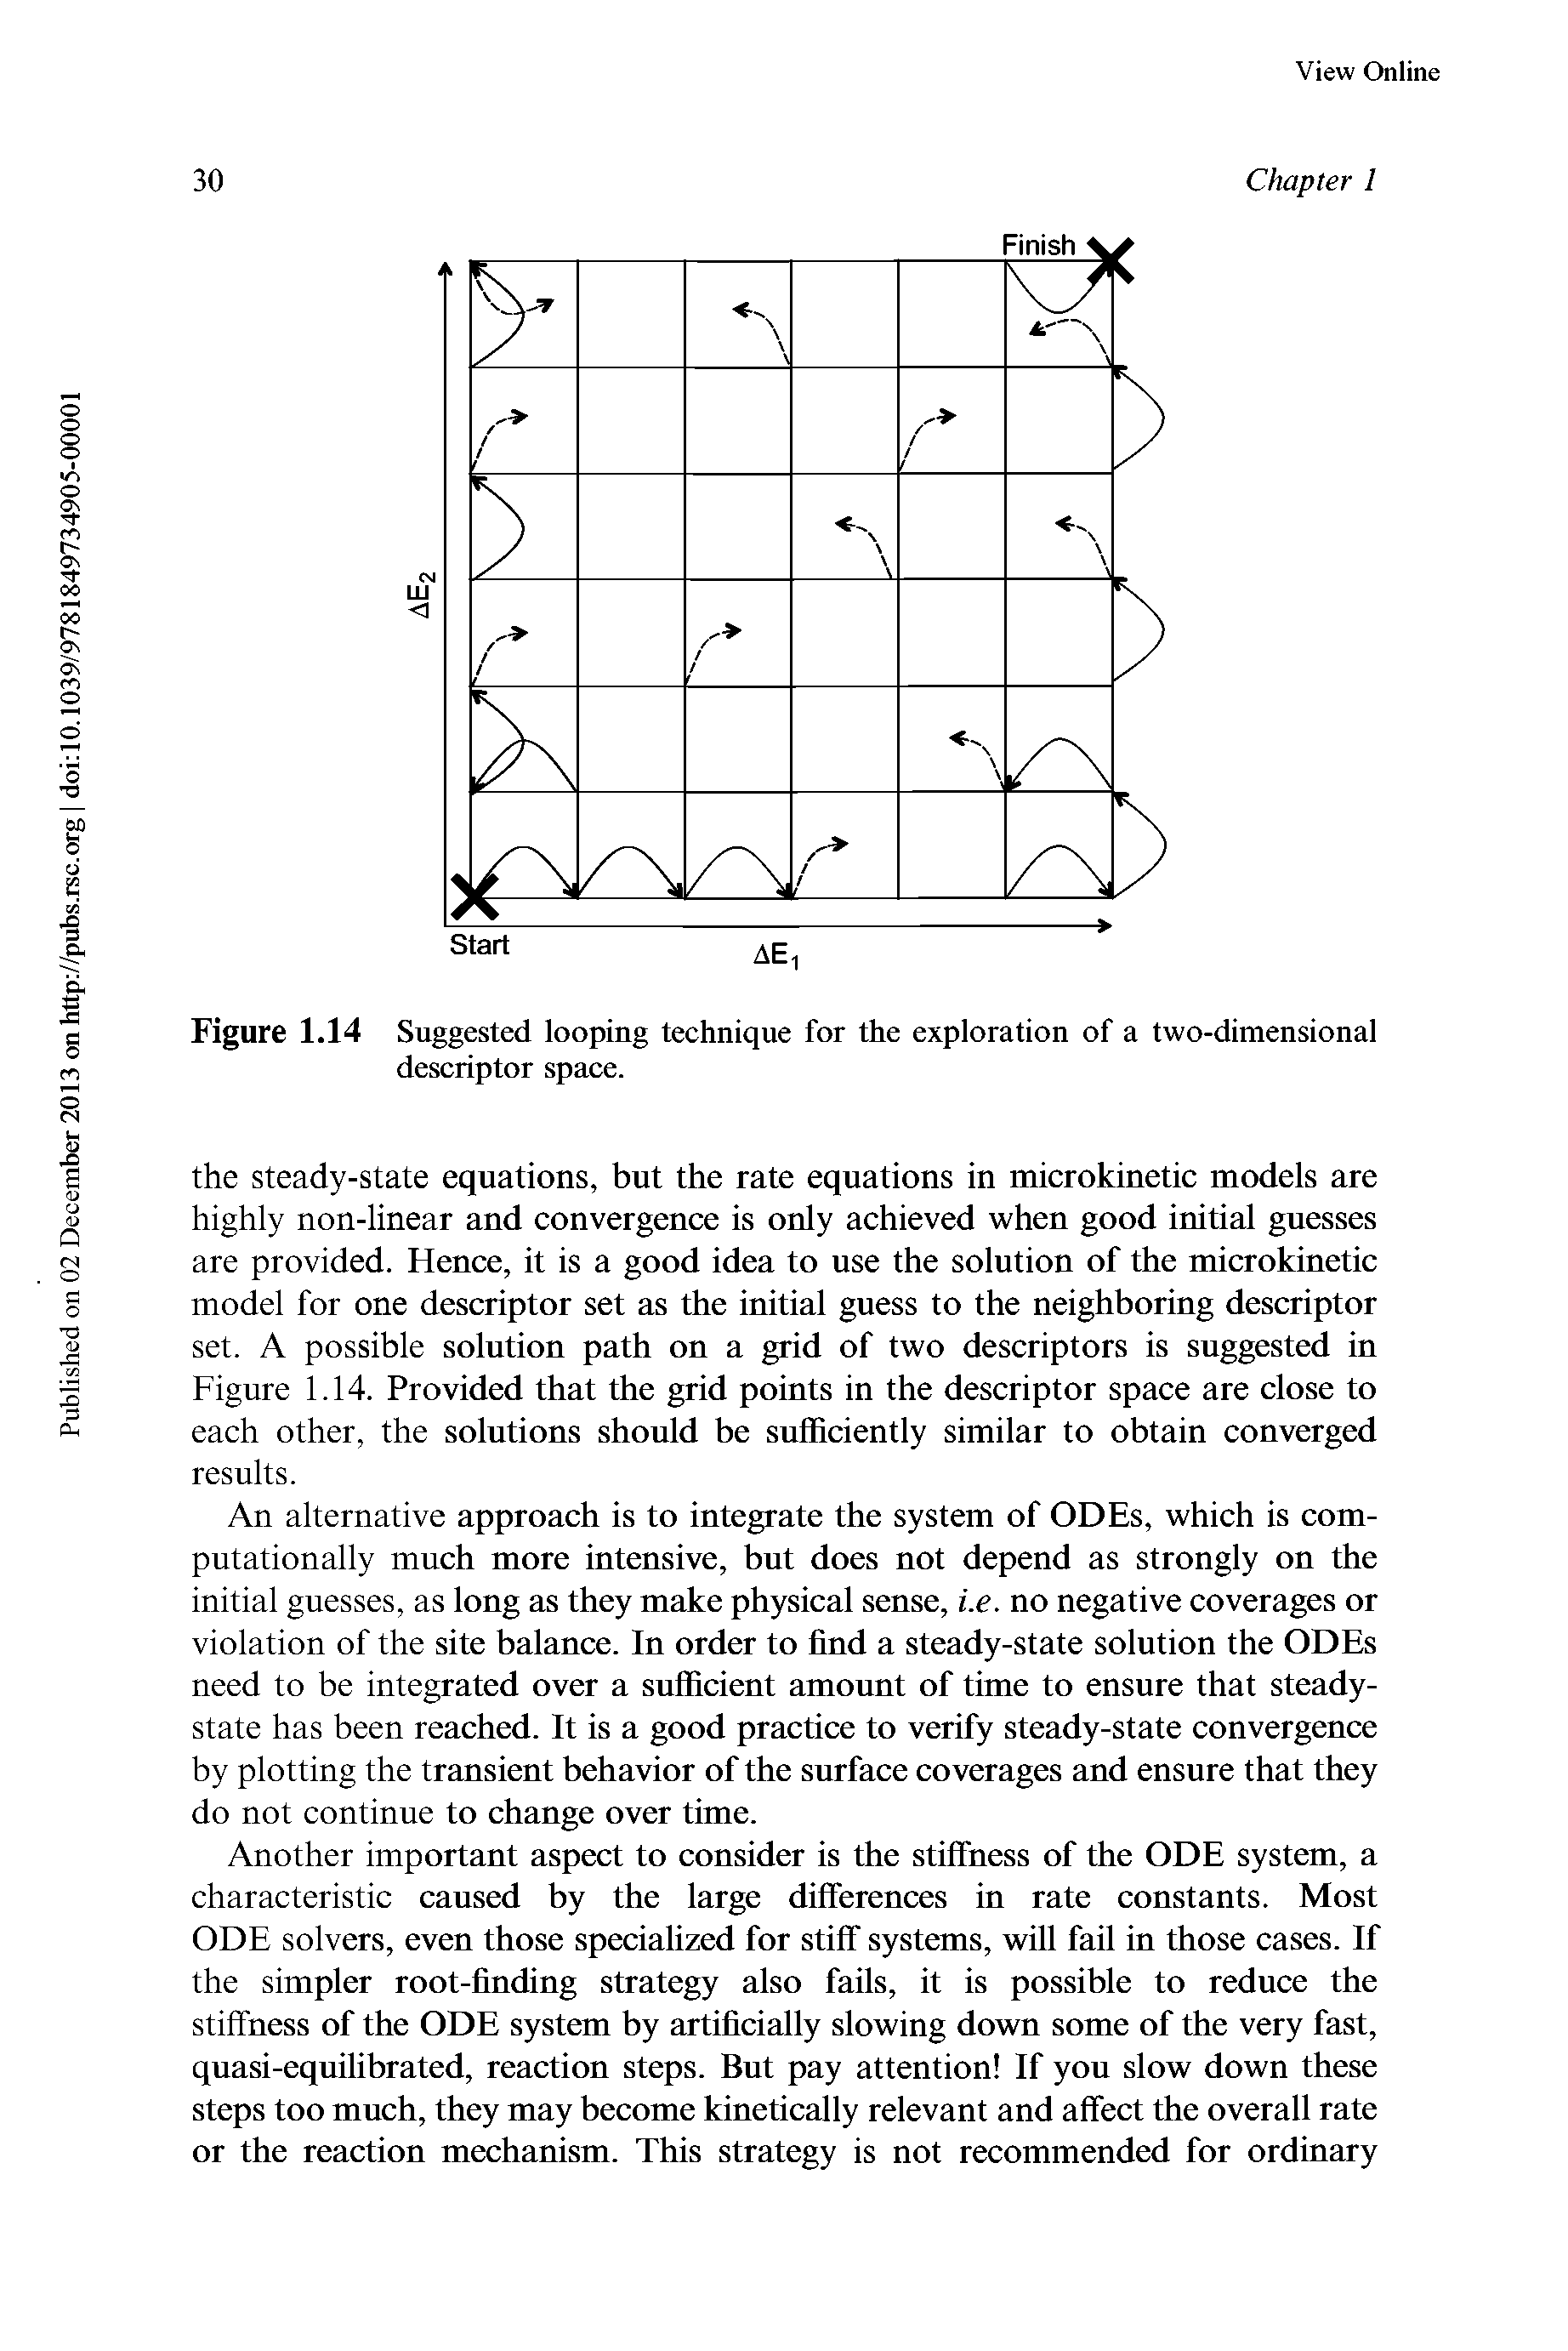 Figure 1.14 Suggested looping technique for the exploration of a two-dimensional descriptor space.